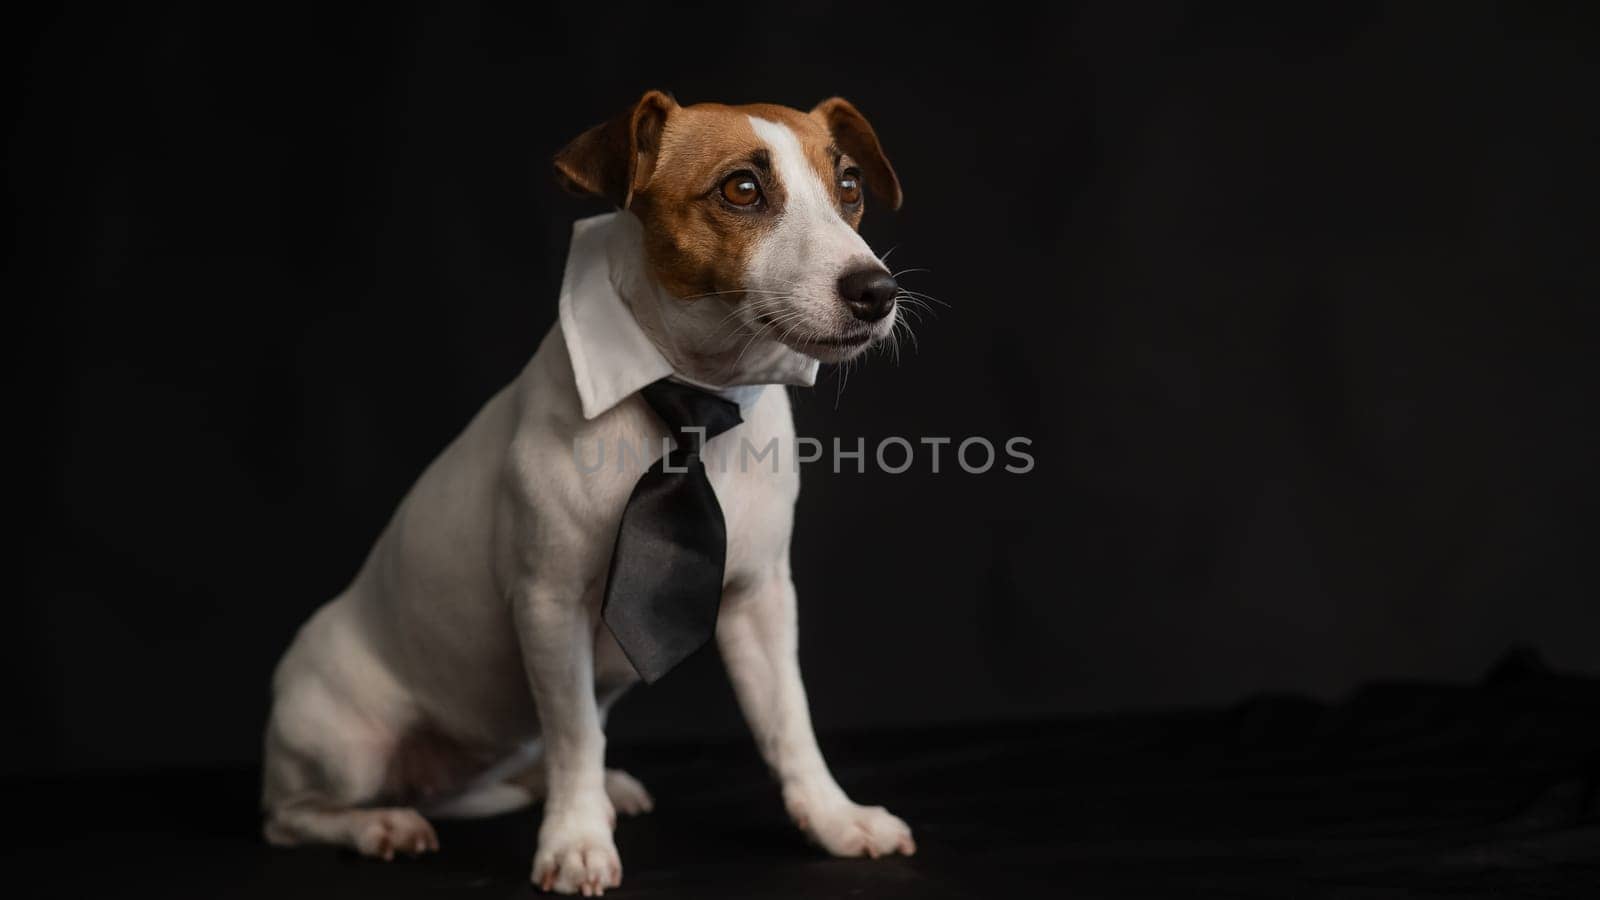 Jack Russell Terrier dog in a tie on a black background. Copy space. by mrwed54